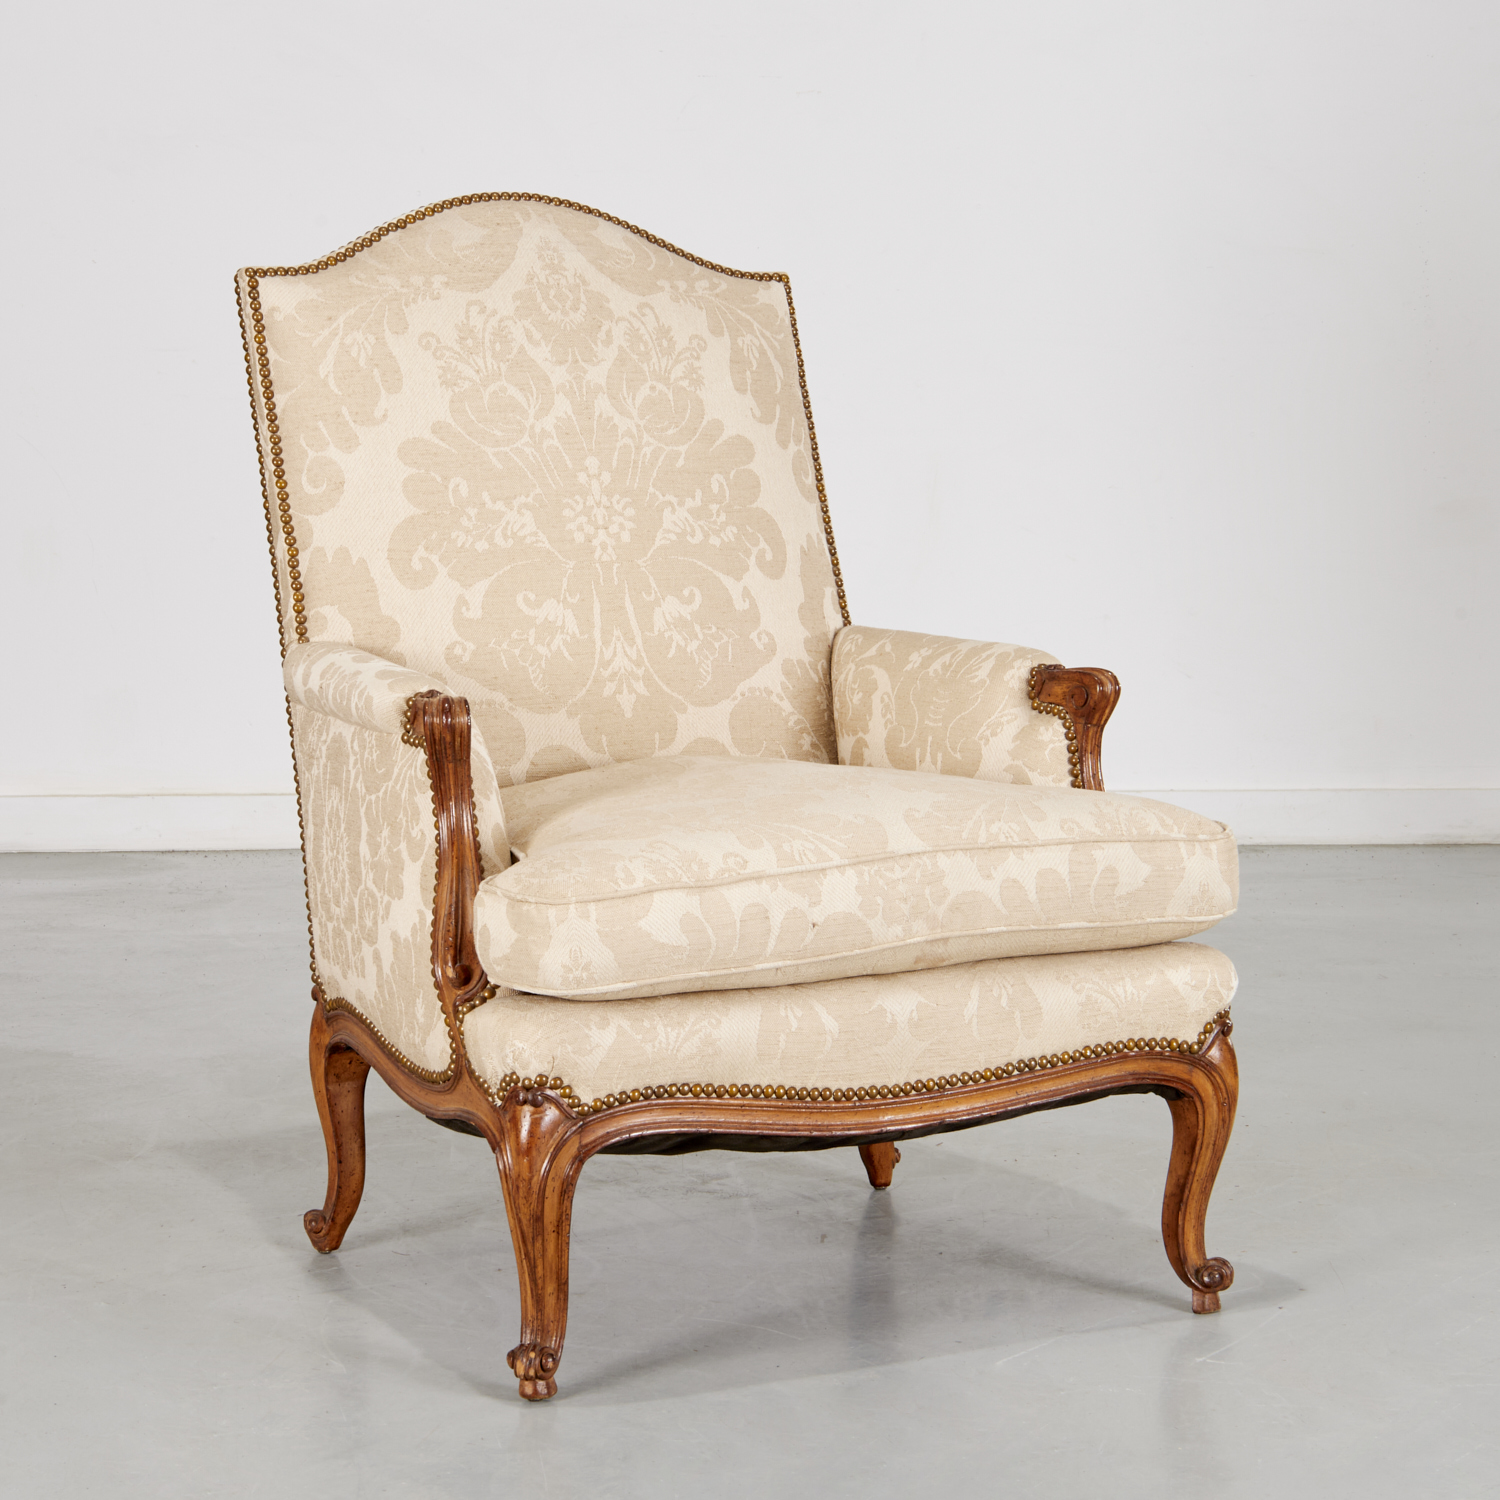 LOUIS XV STYLE BERGERE 20th c.,